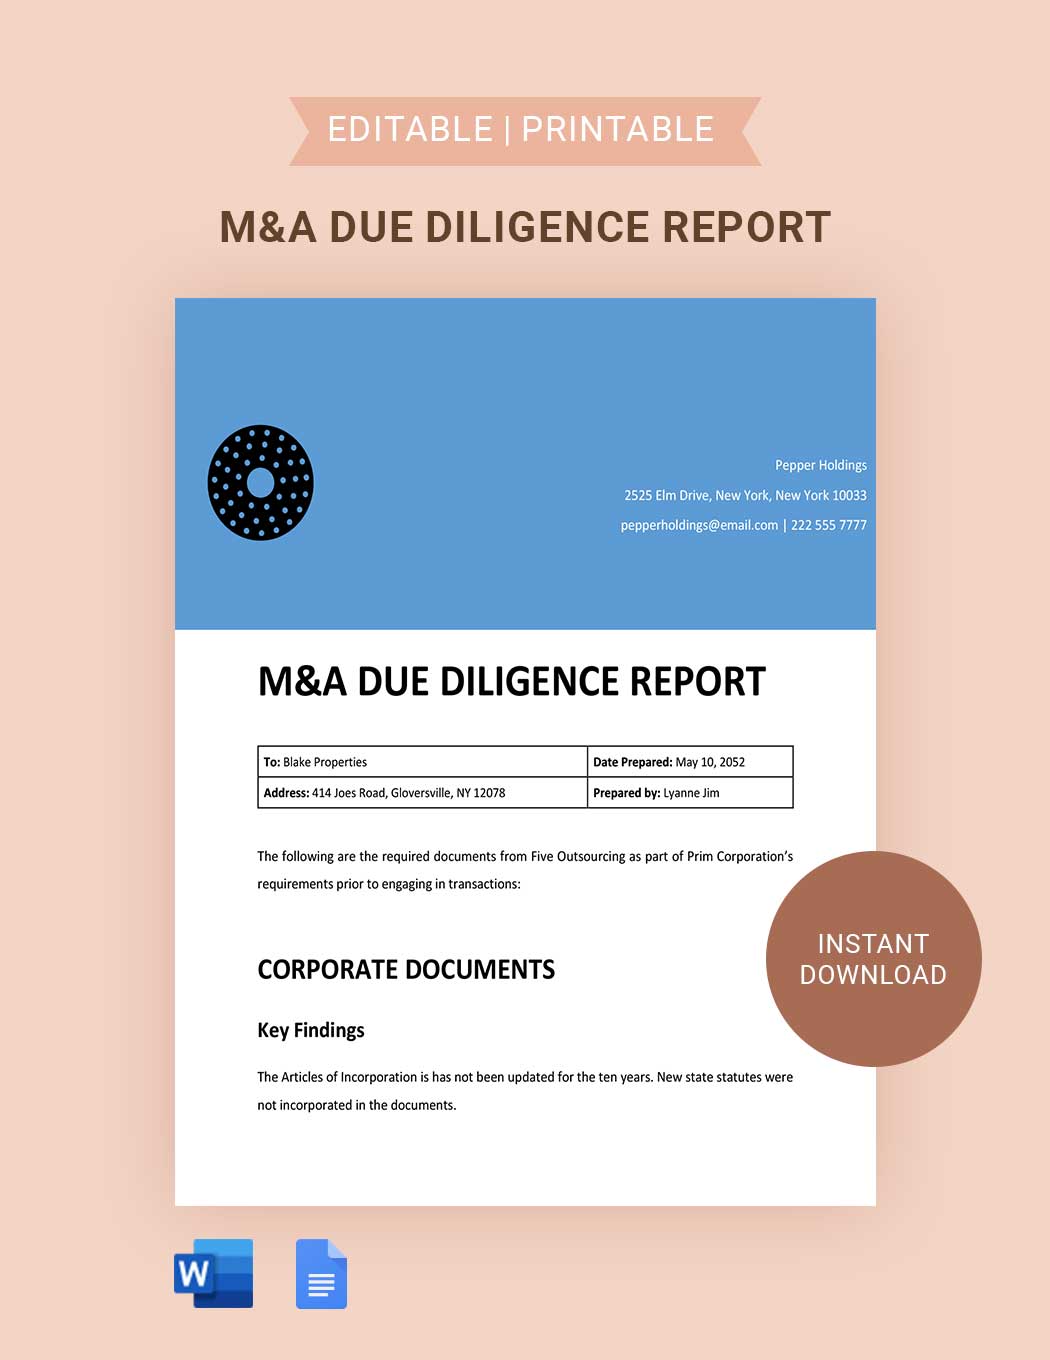 M&A Due Diligence Report 